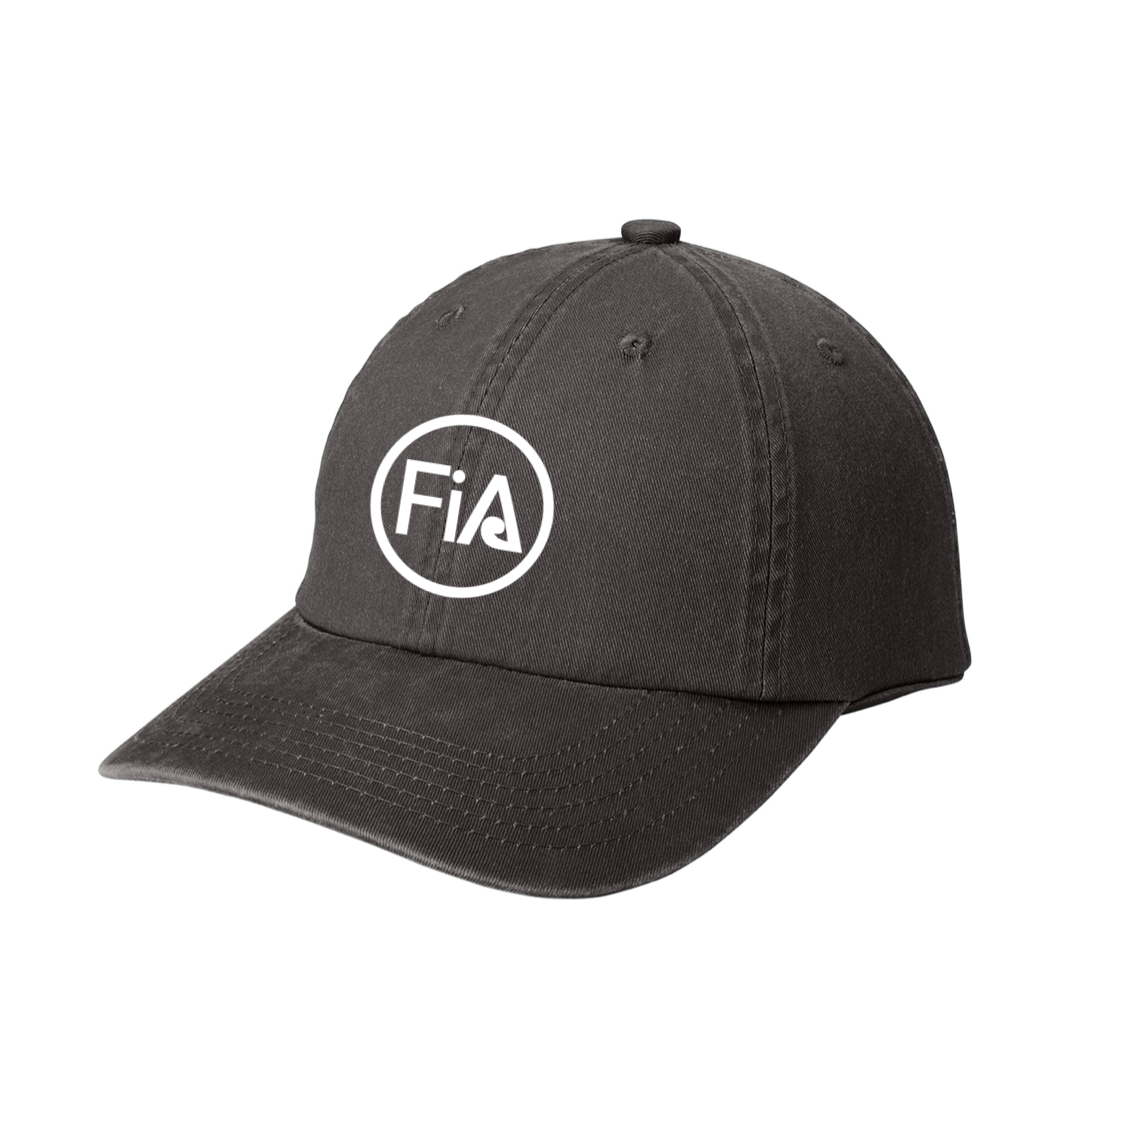 FiA Port Authority Ladies Garment Washed Cap - Made to Order